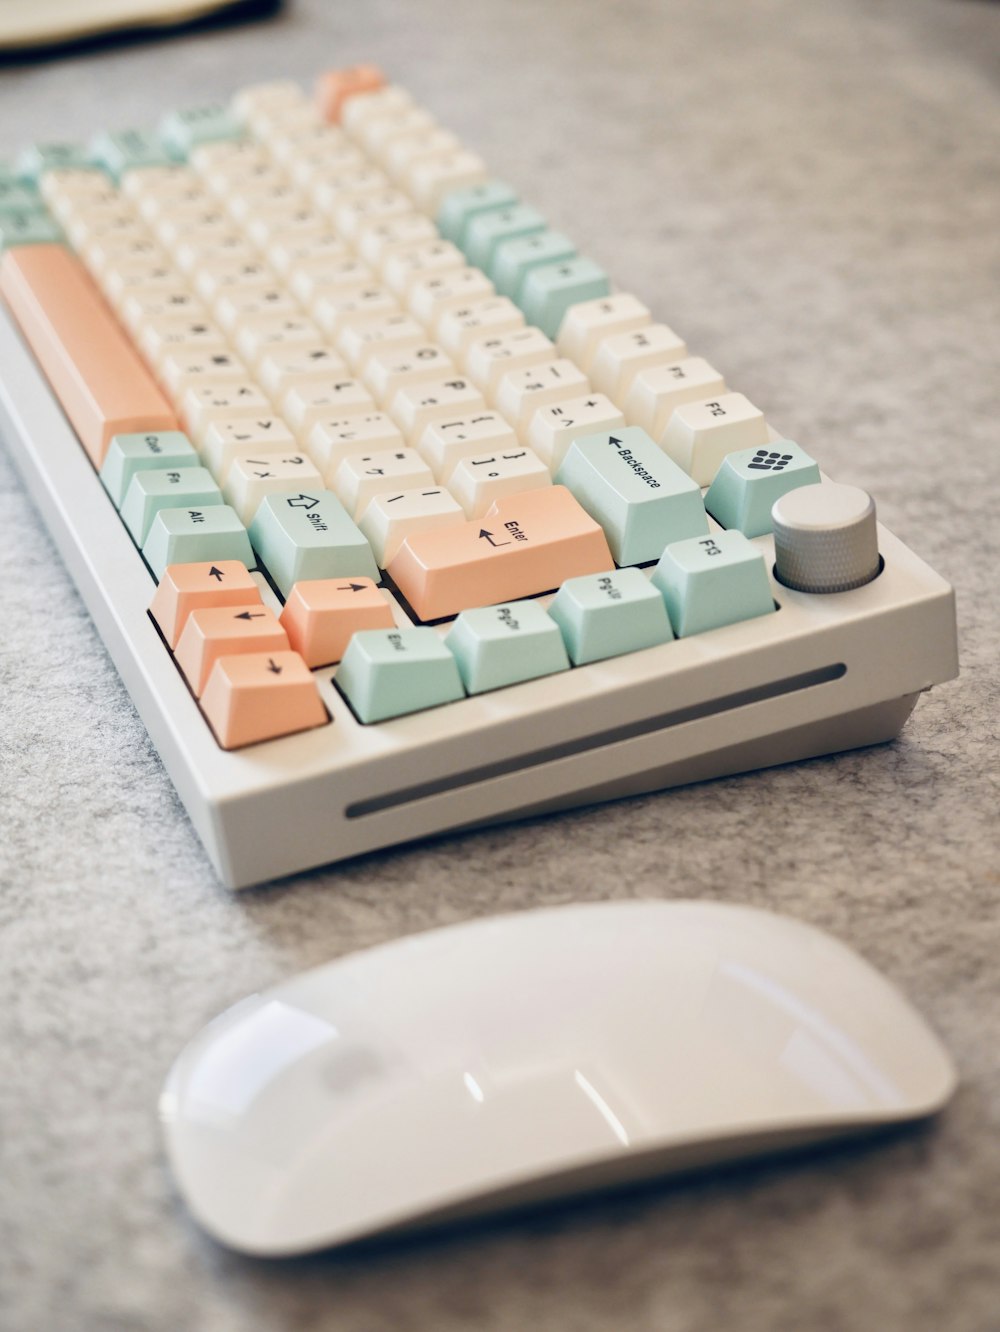 a computer keyboard and mouse on a table